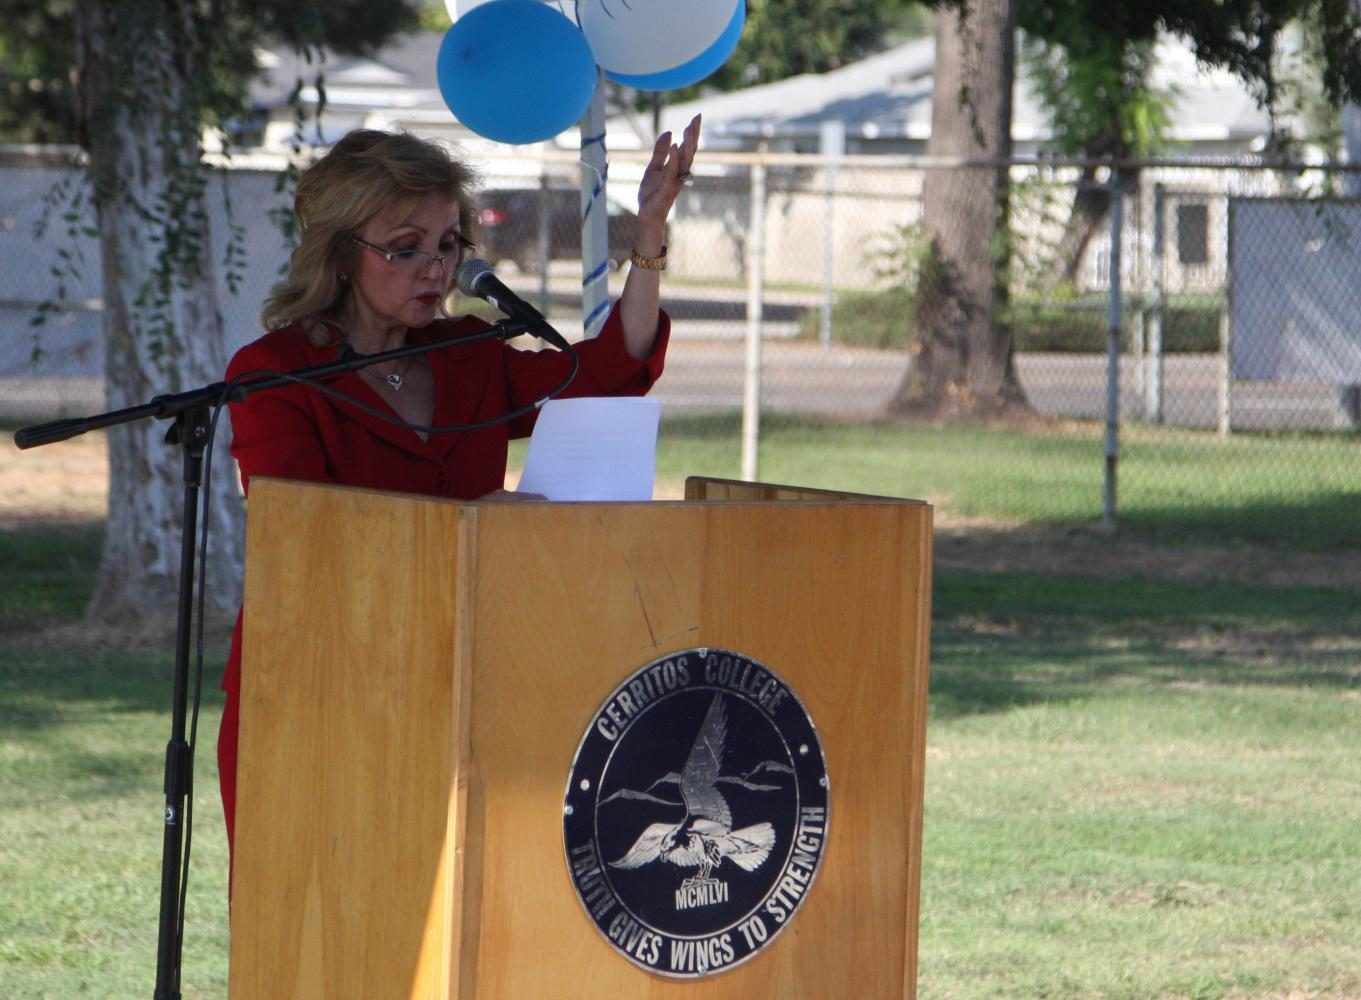 Hasmik Danielian, Norwalk-La Mirada Unified School District superintendent speaking at the opening ceremony at La Mirada adult school. Classes will now be available at the adult school from MATH, ENG and ESL. Photo credit: David Jenkins